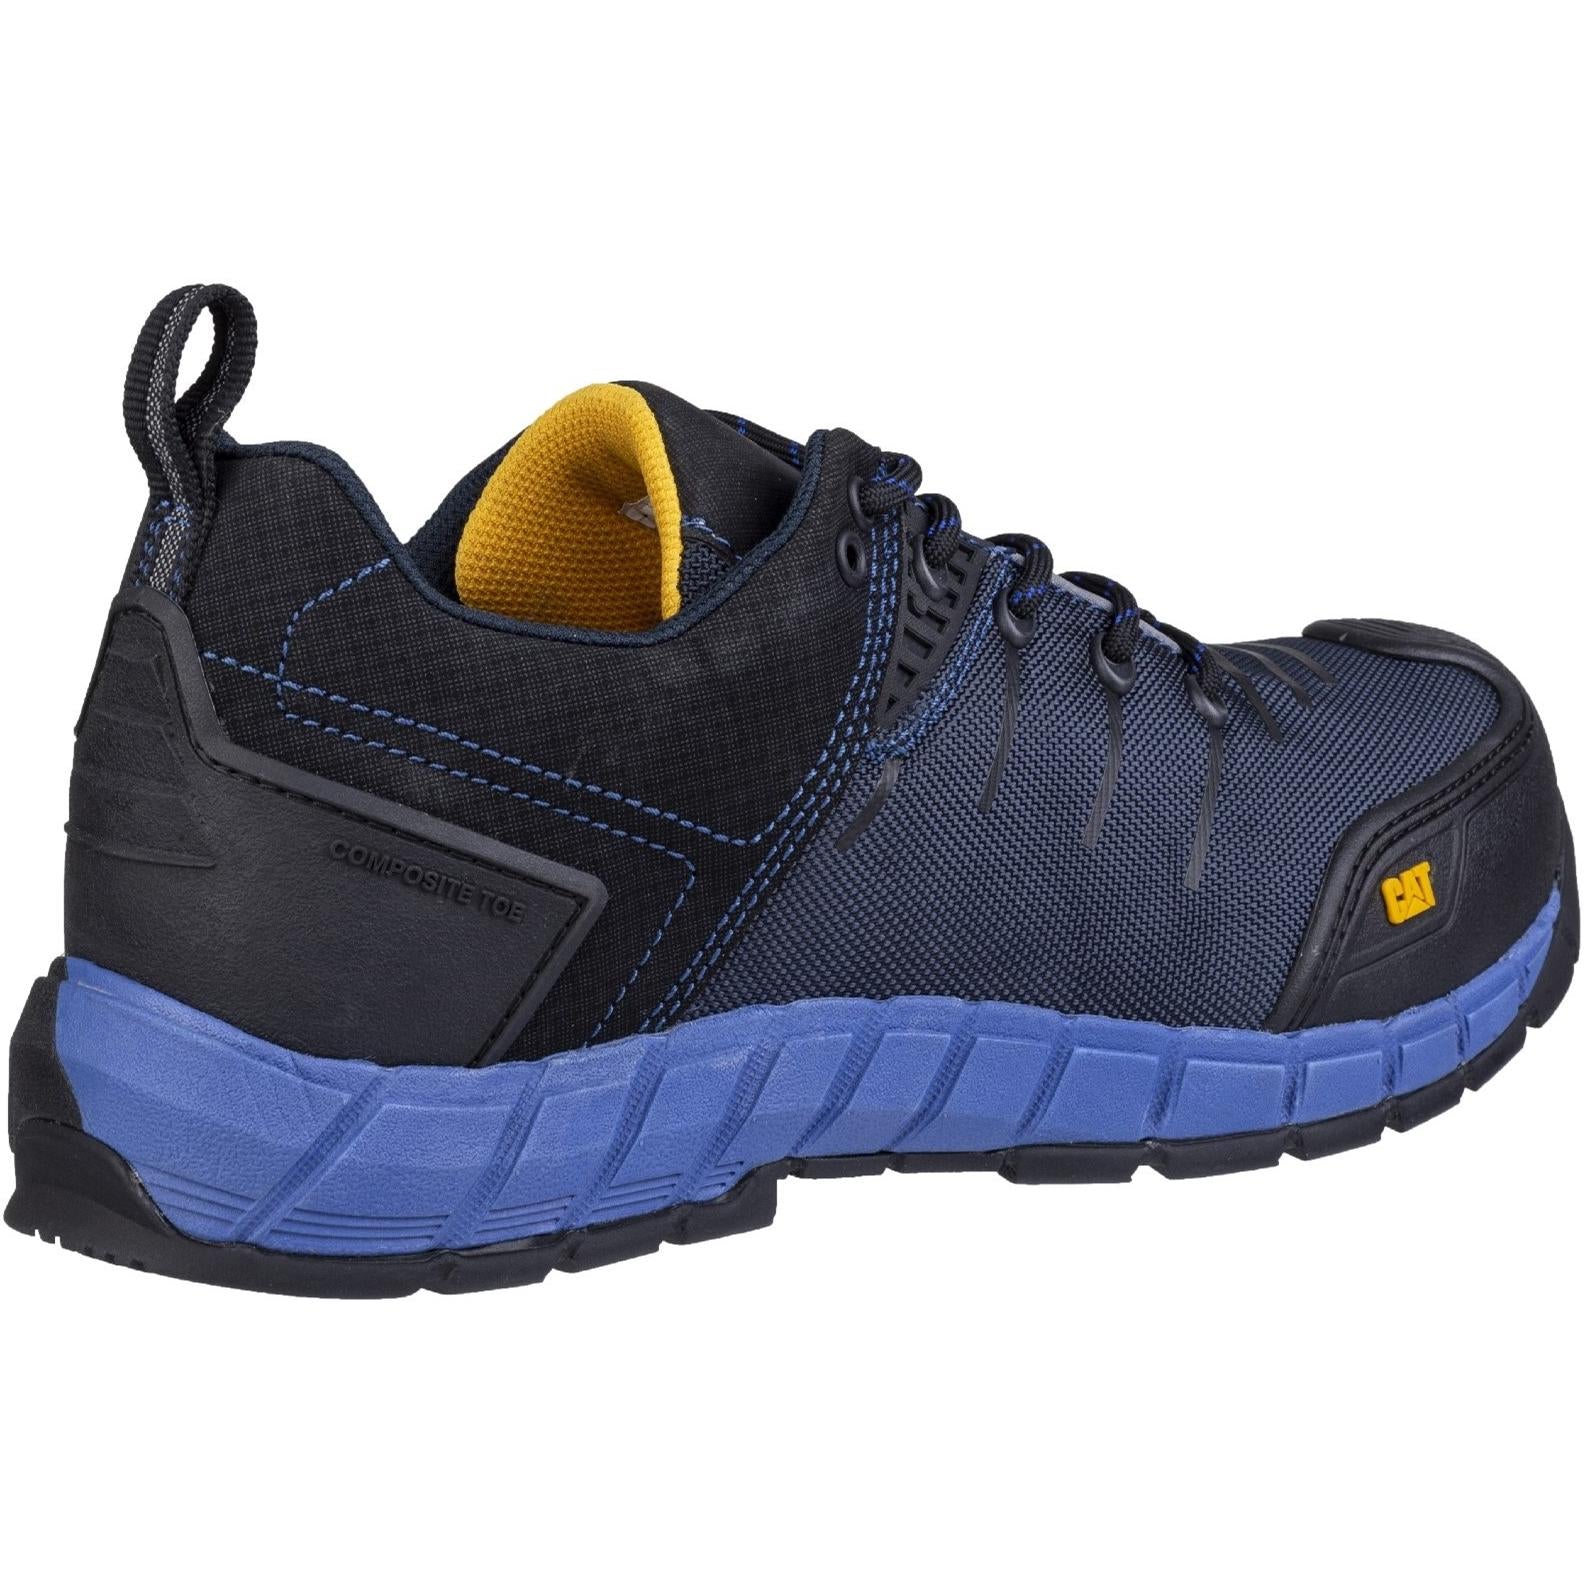 Caterpillar Byway Lace Up Safety Trainer